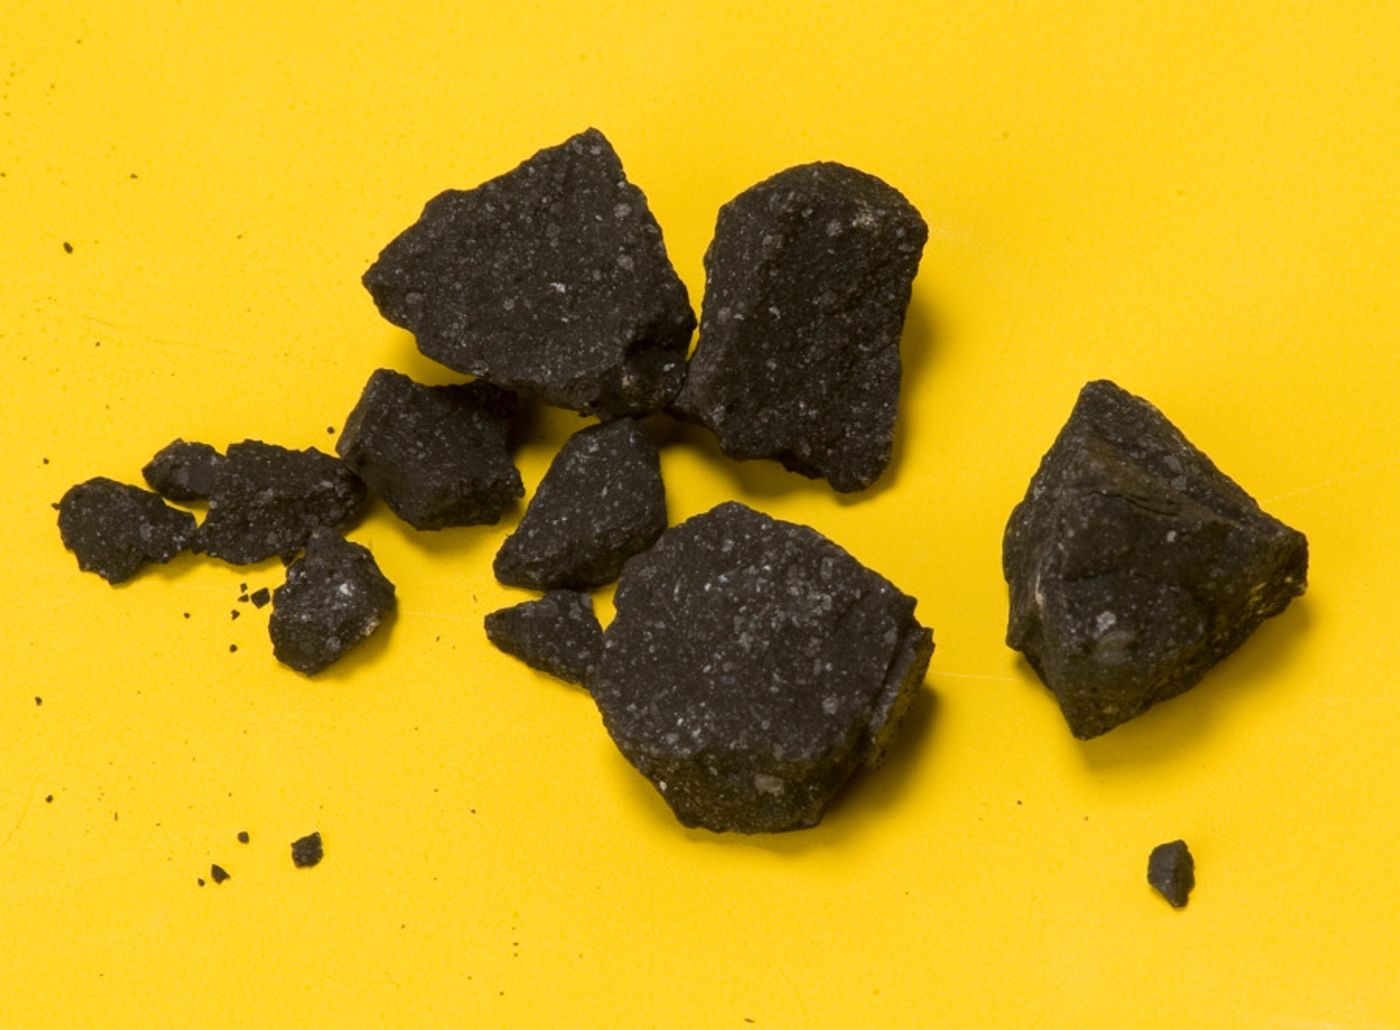 This image from NASA is of samples from Sutter's Mill Meteorite, a carbonaceous chondrite which landed on April 22, 2012. Sutter's Mill is associated with the California Gold Rush. Image Credit P. Jenniskens (SETI Institute) and Eric James (NASA Ames) 